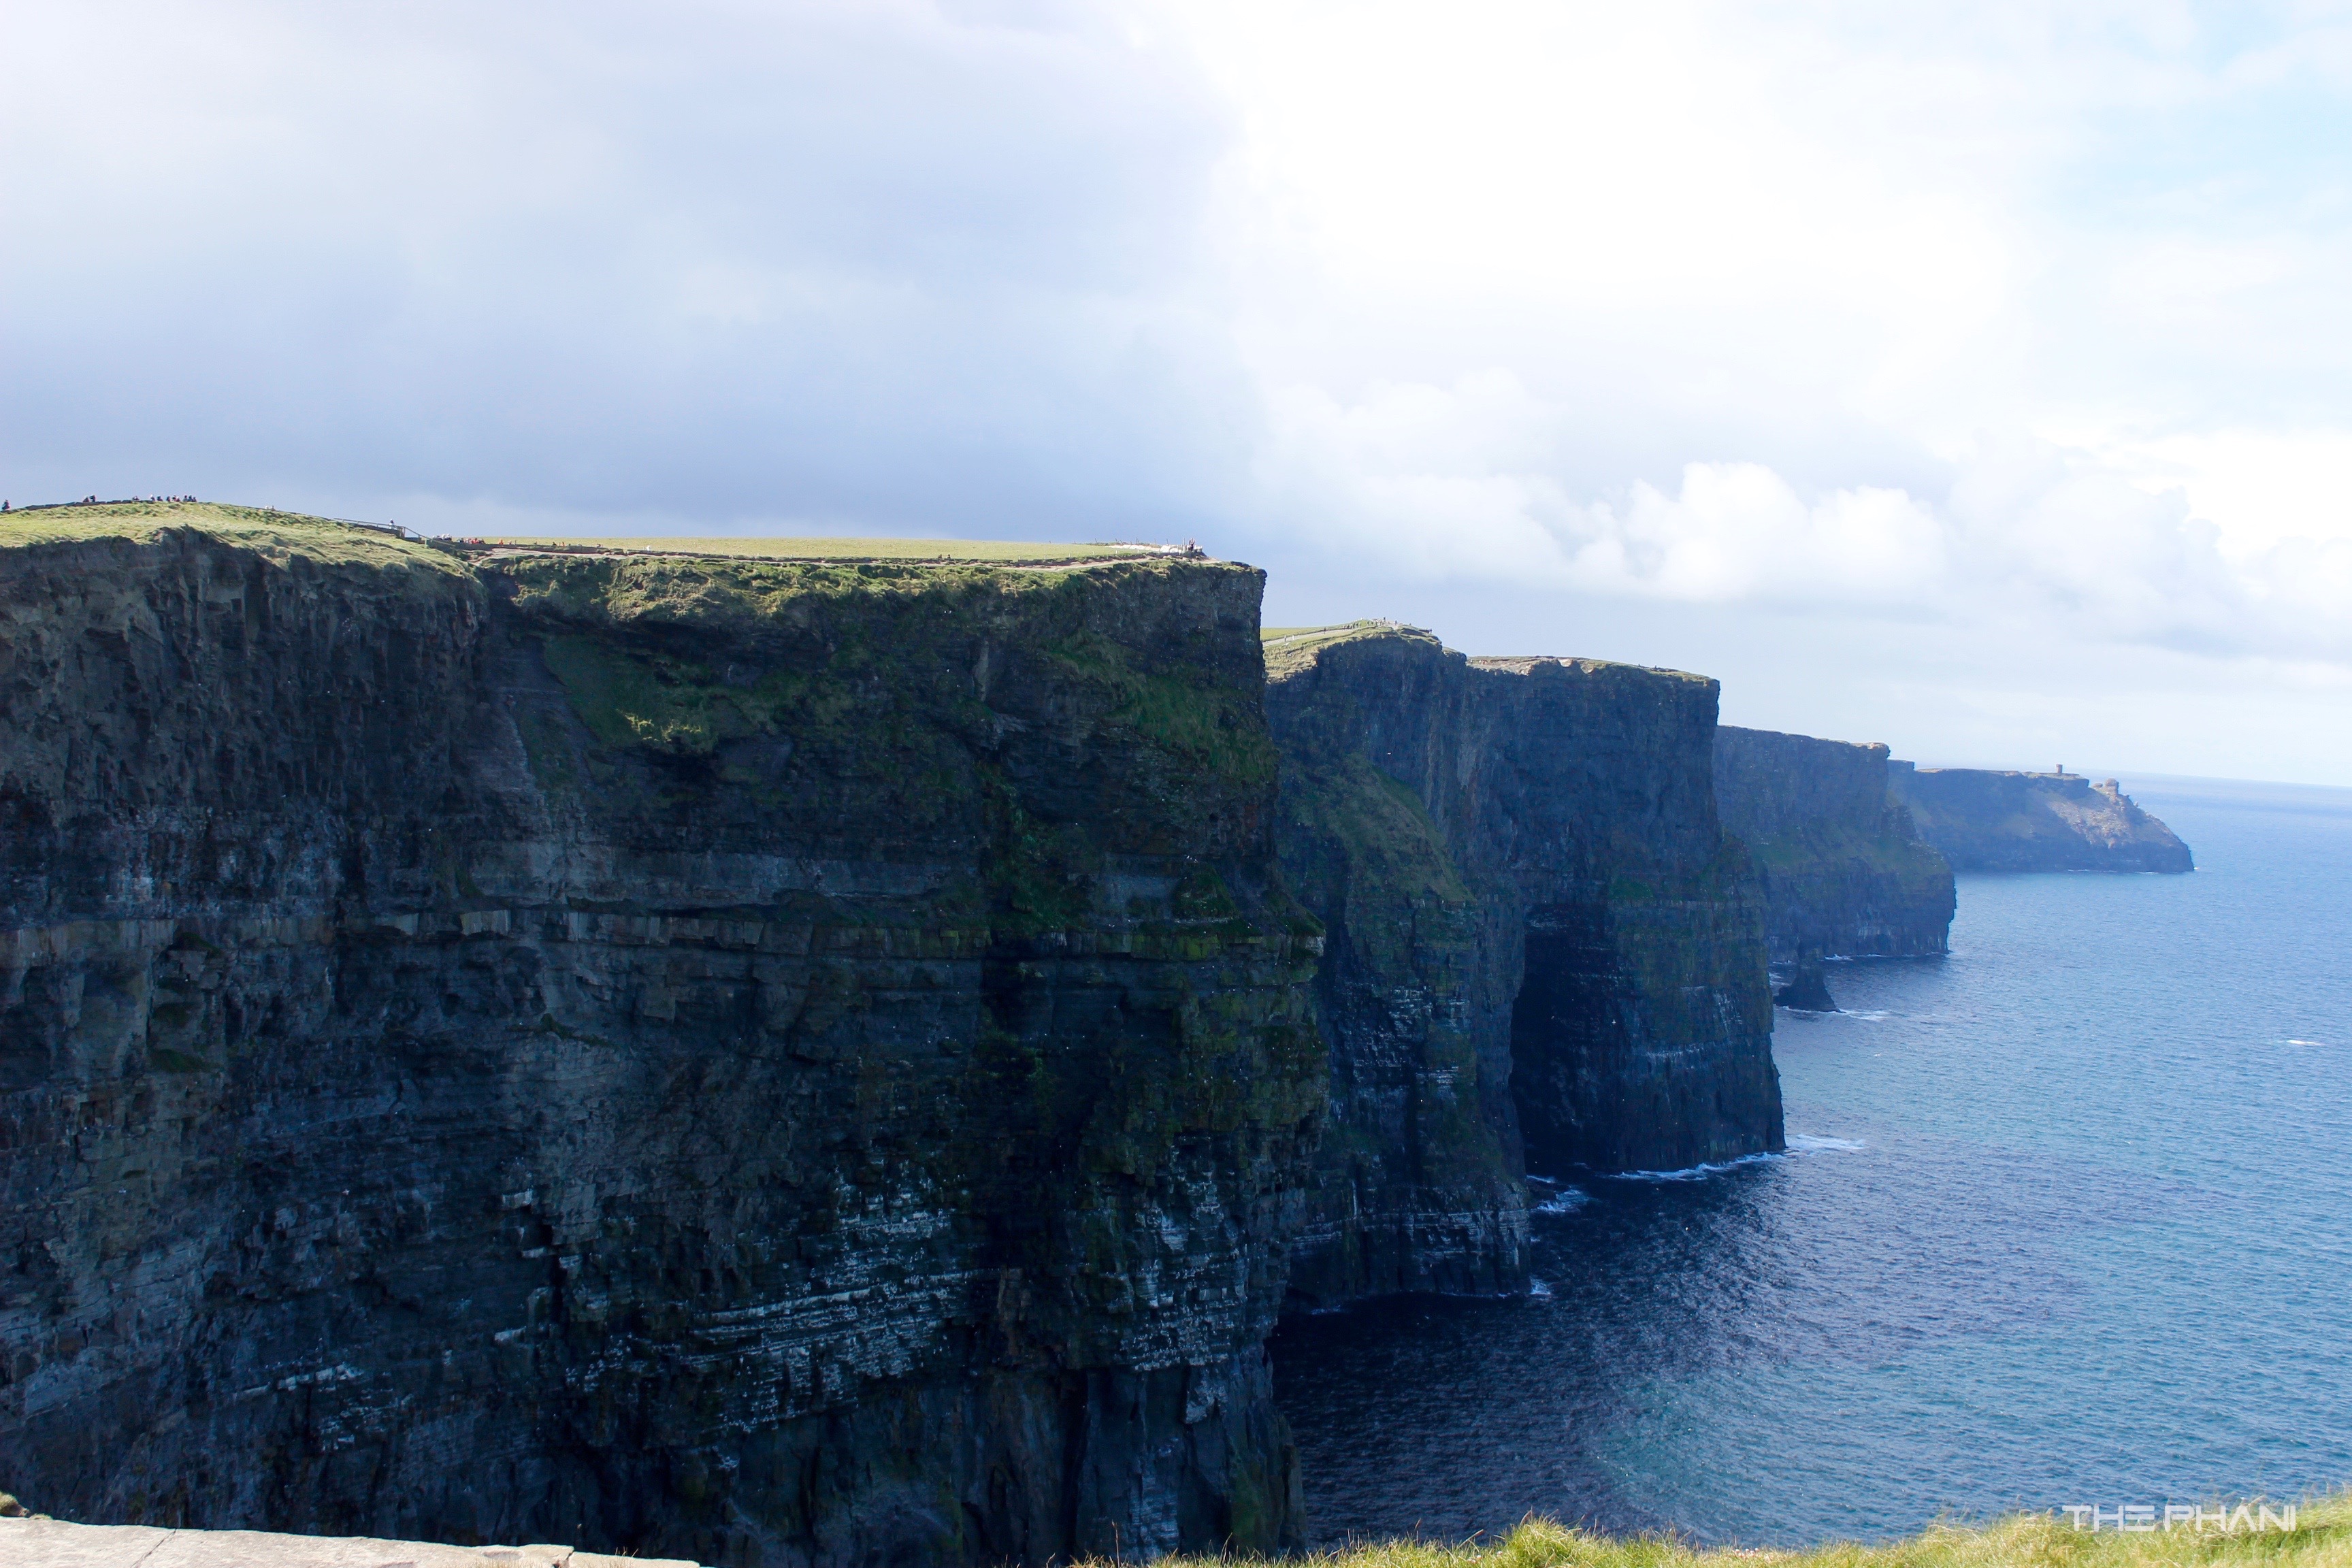 My visit to Cliffs of Moher, Dublin